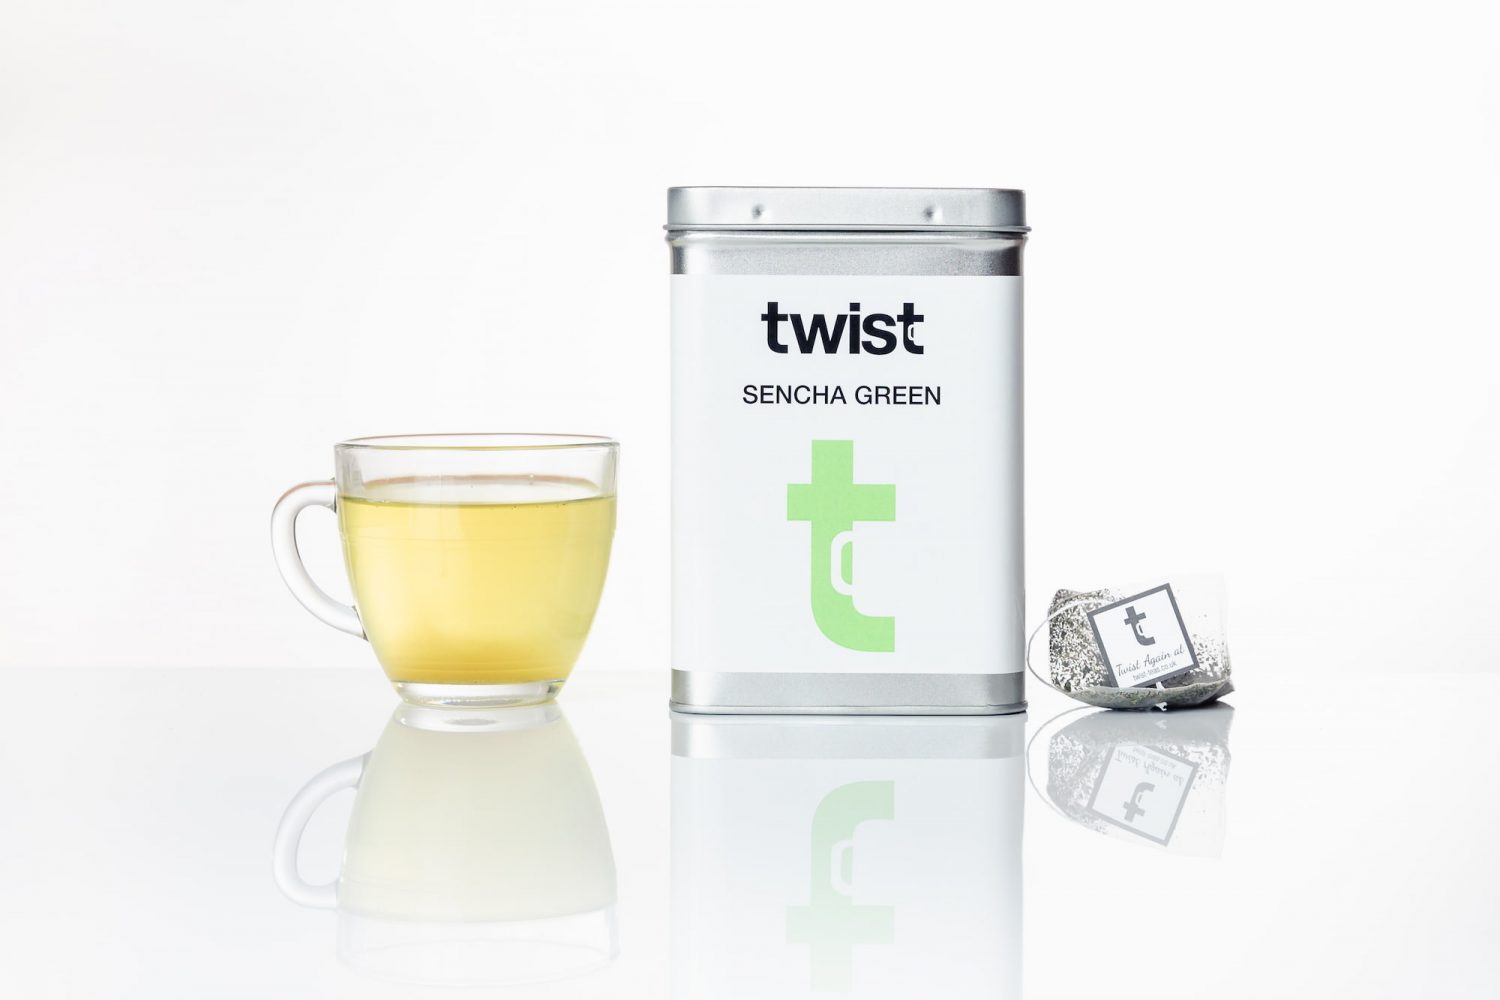 A Twist Teas 'Sencha Green' caddy placed in between a quality cup of green tea and a teabag.